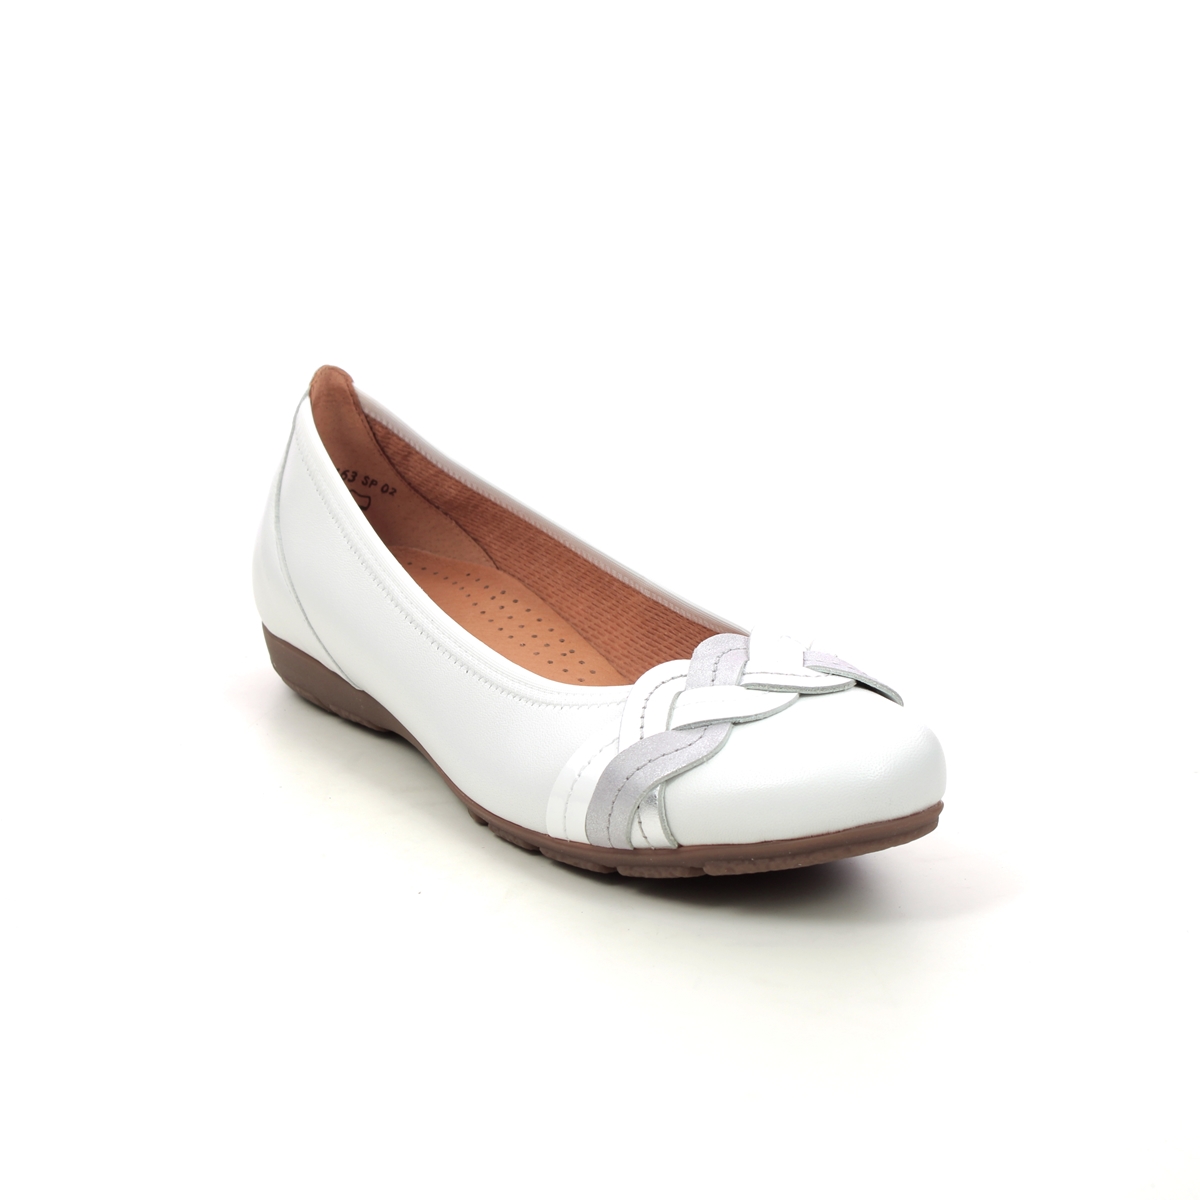 Gabor Redhill Hovercraft White Leather Womens pumps 24.160.21 in a Plain Leather in Size 7